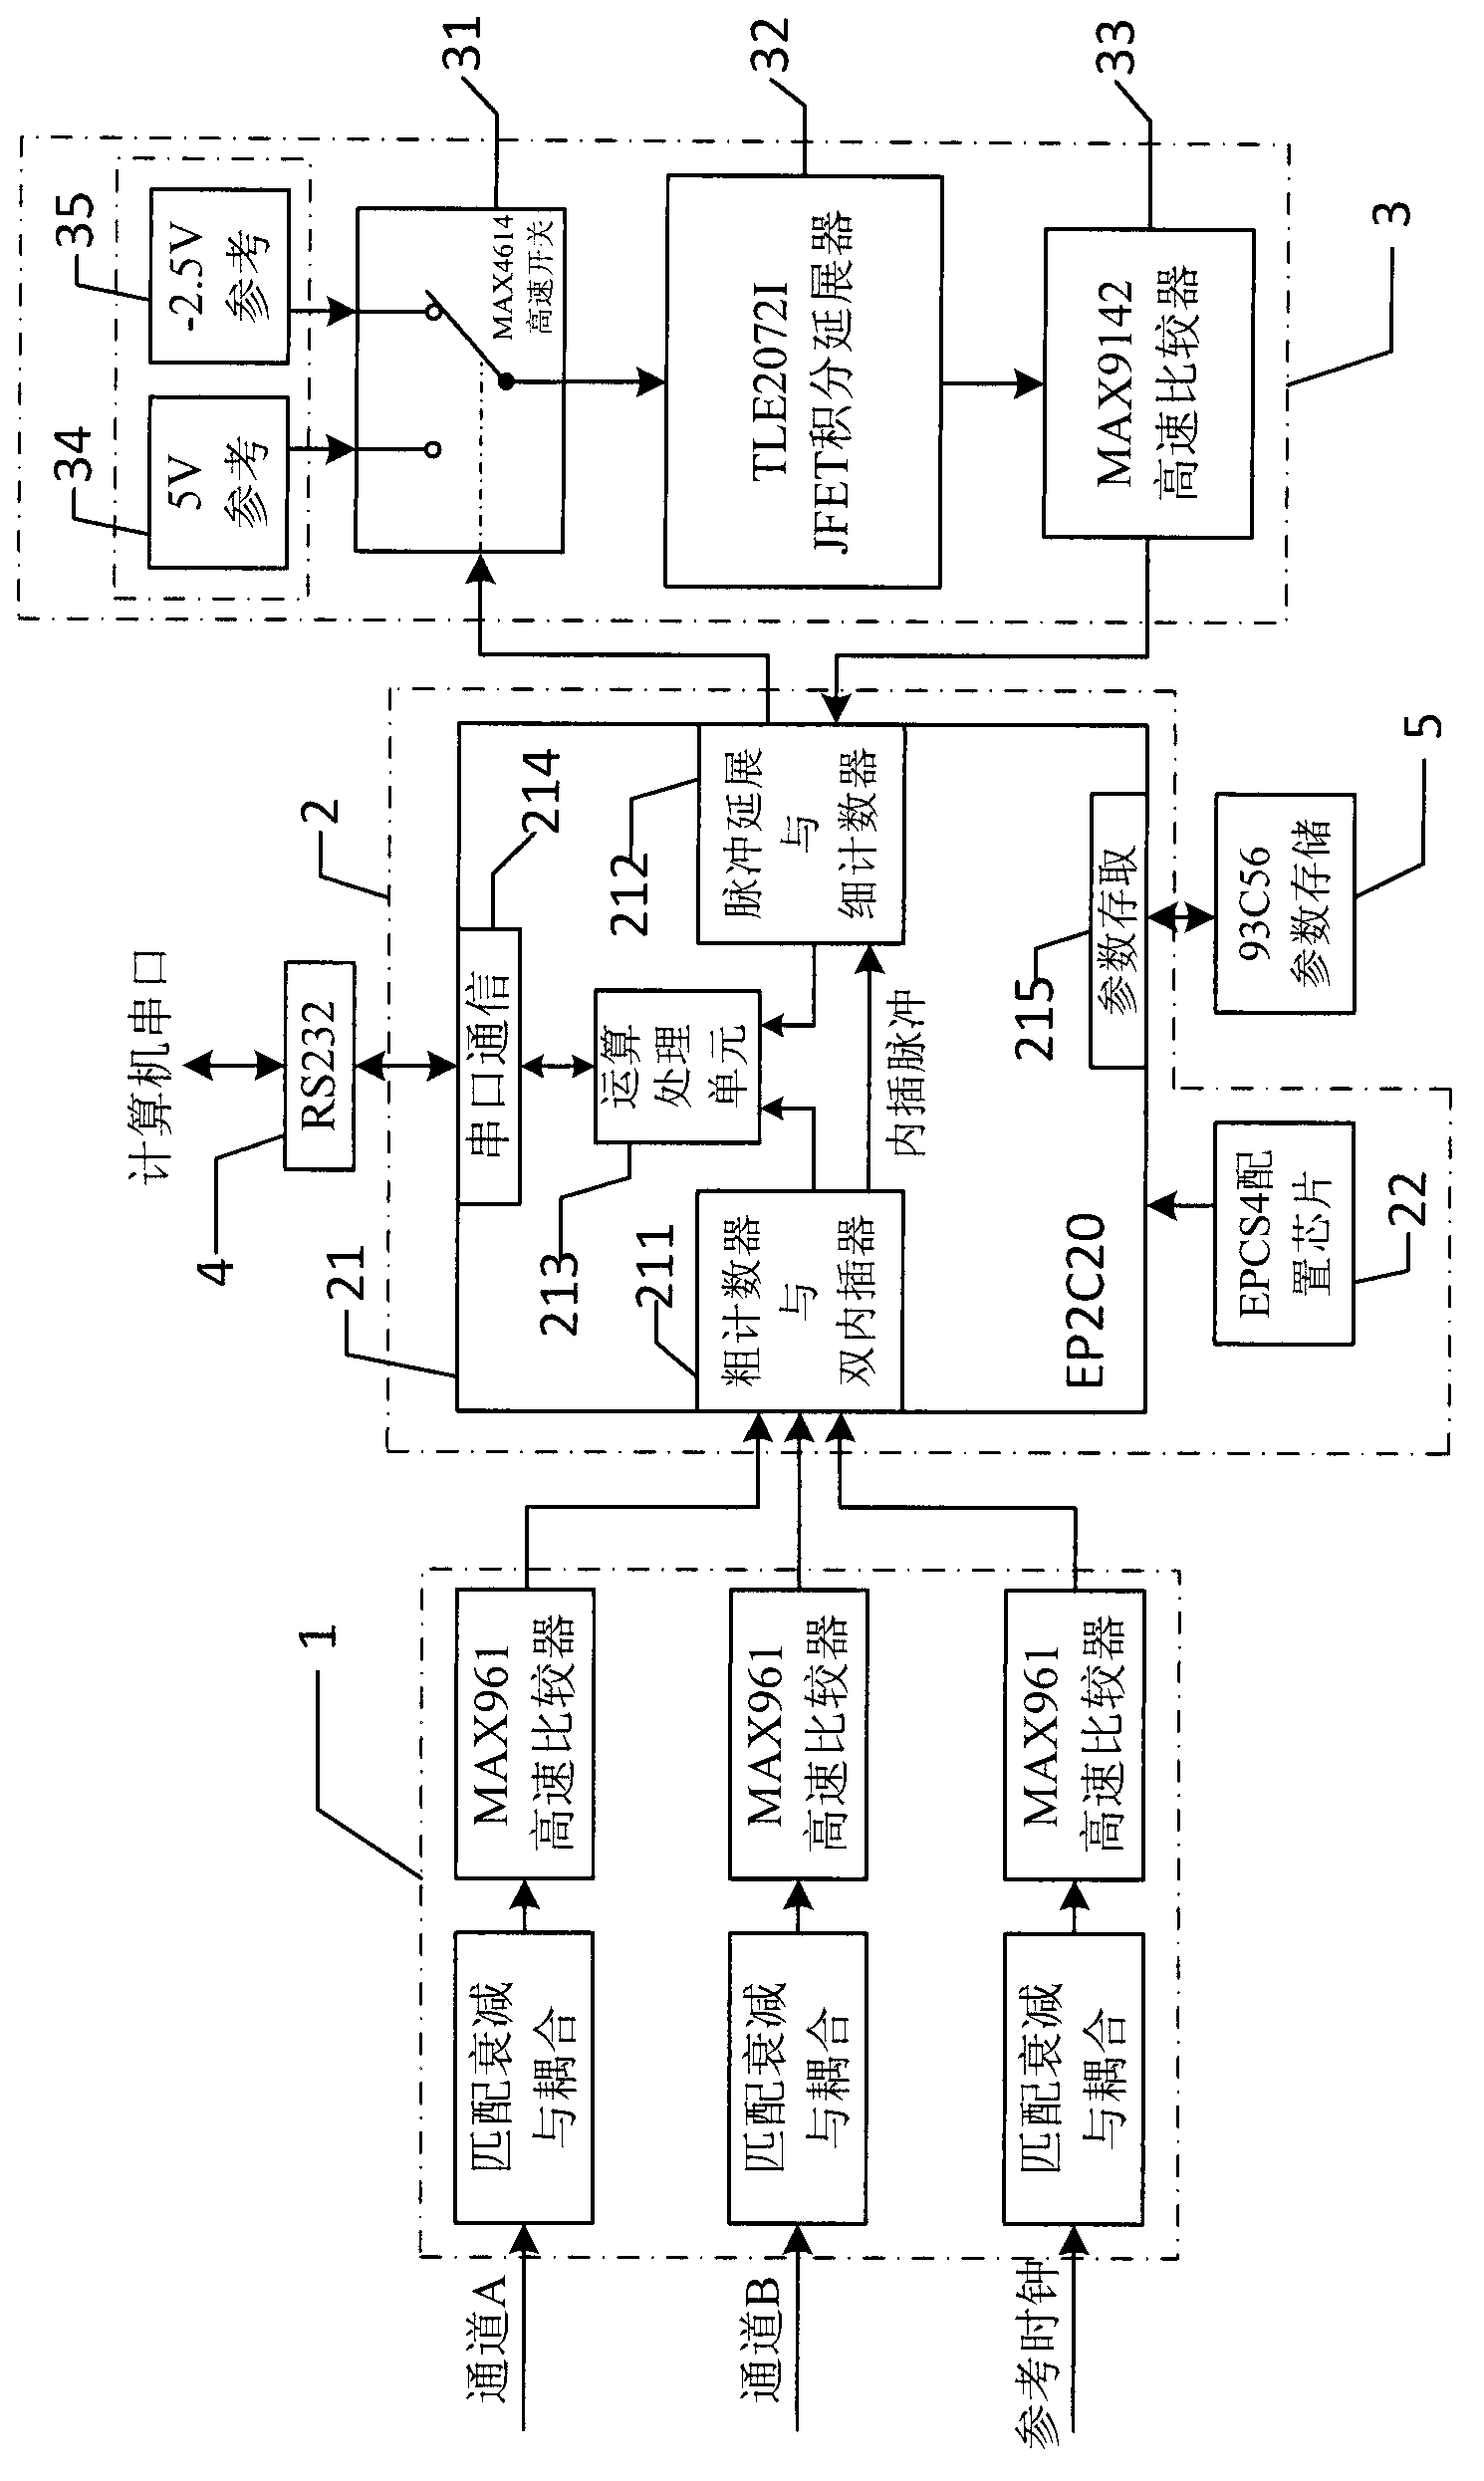 High-precision phase and frequence measuring system